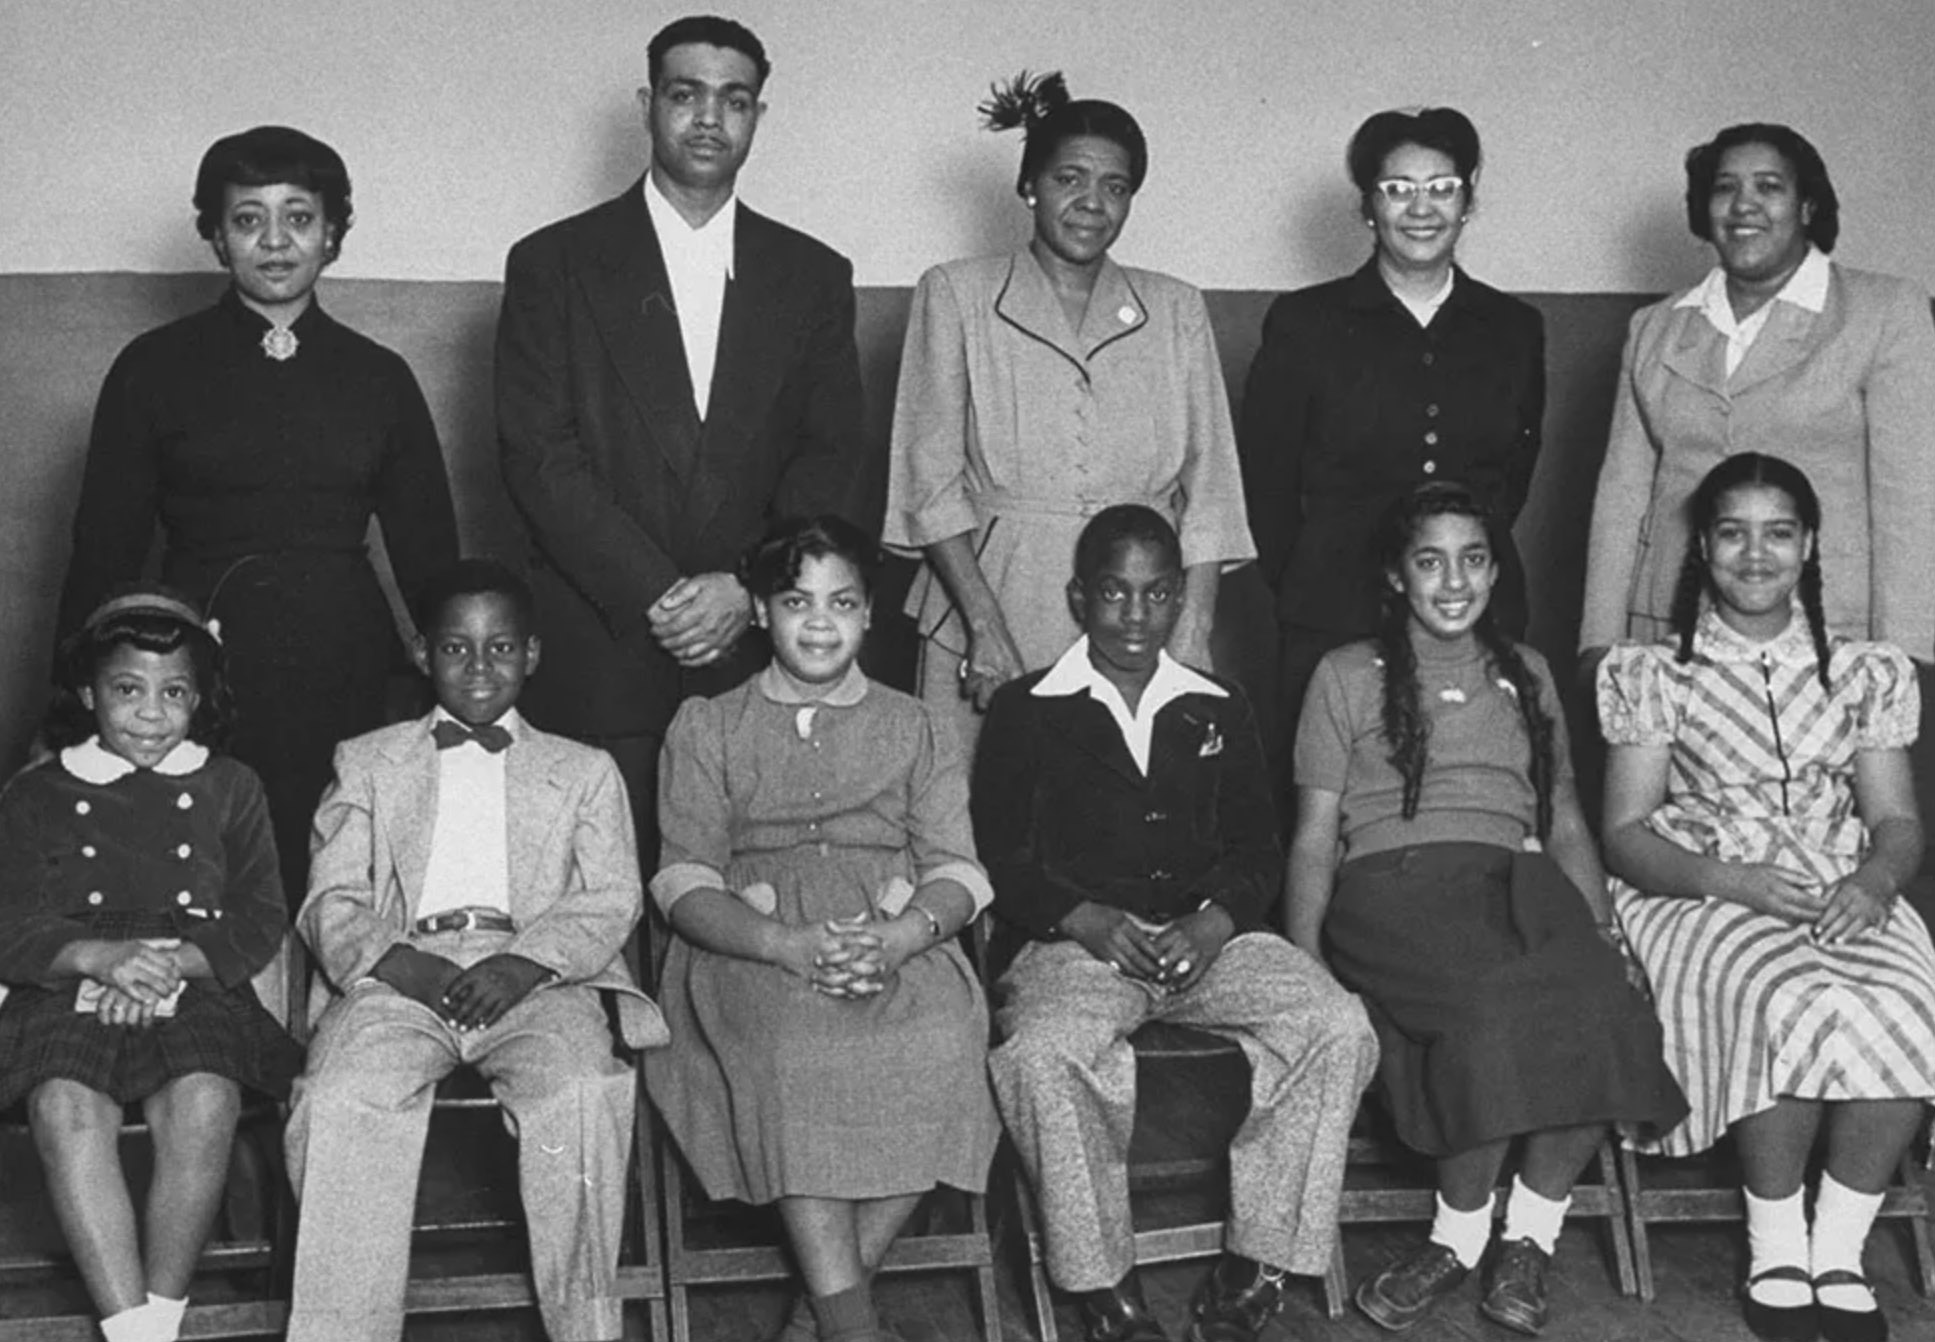 Linda Brown is seated third from the left. Her father, Oliver Brown, is standing second from the left.